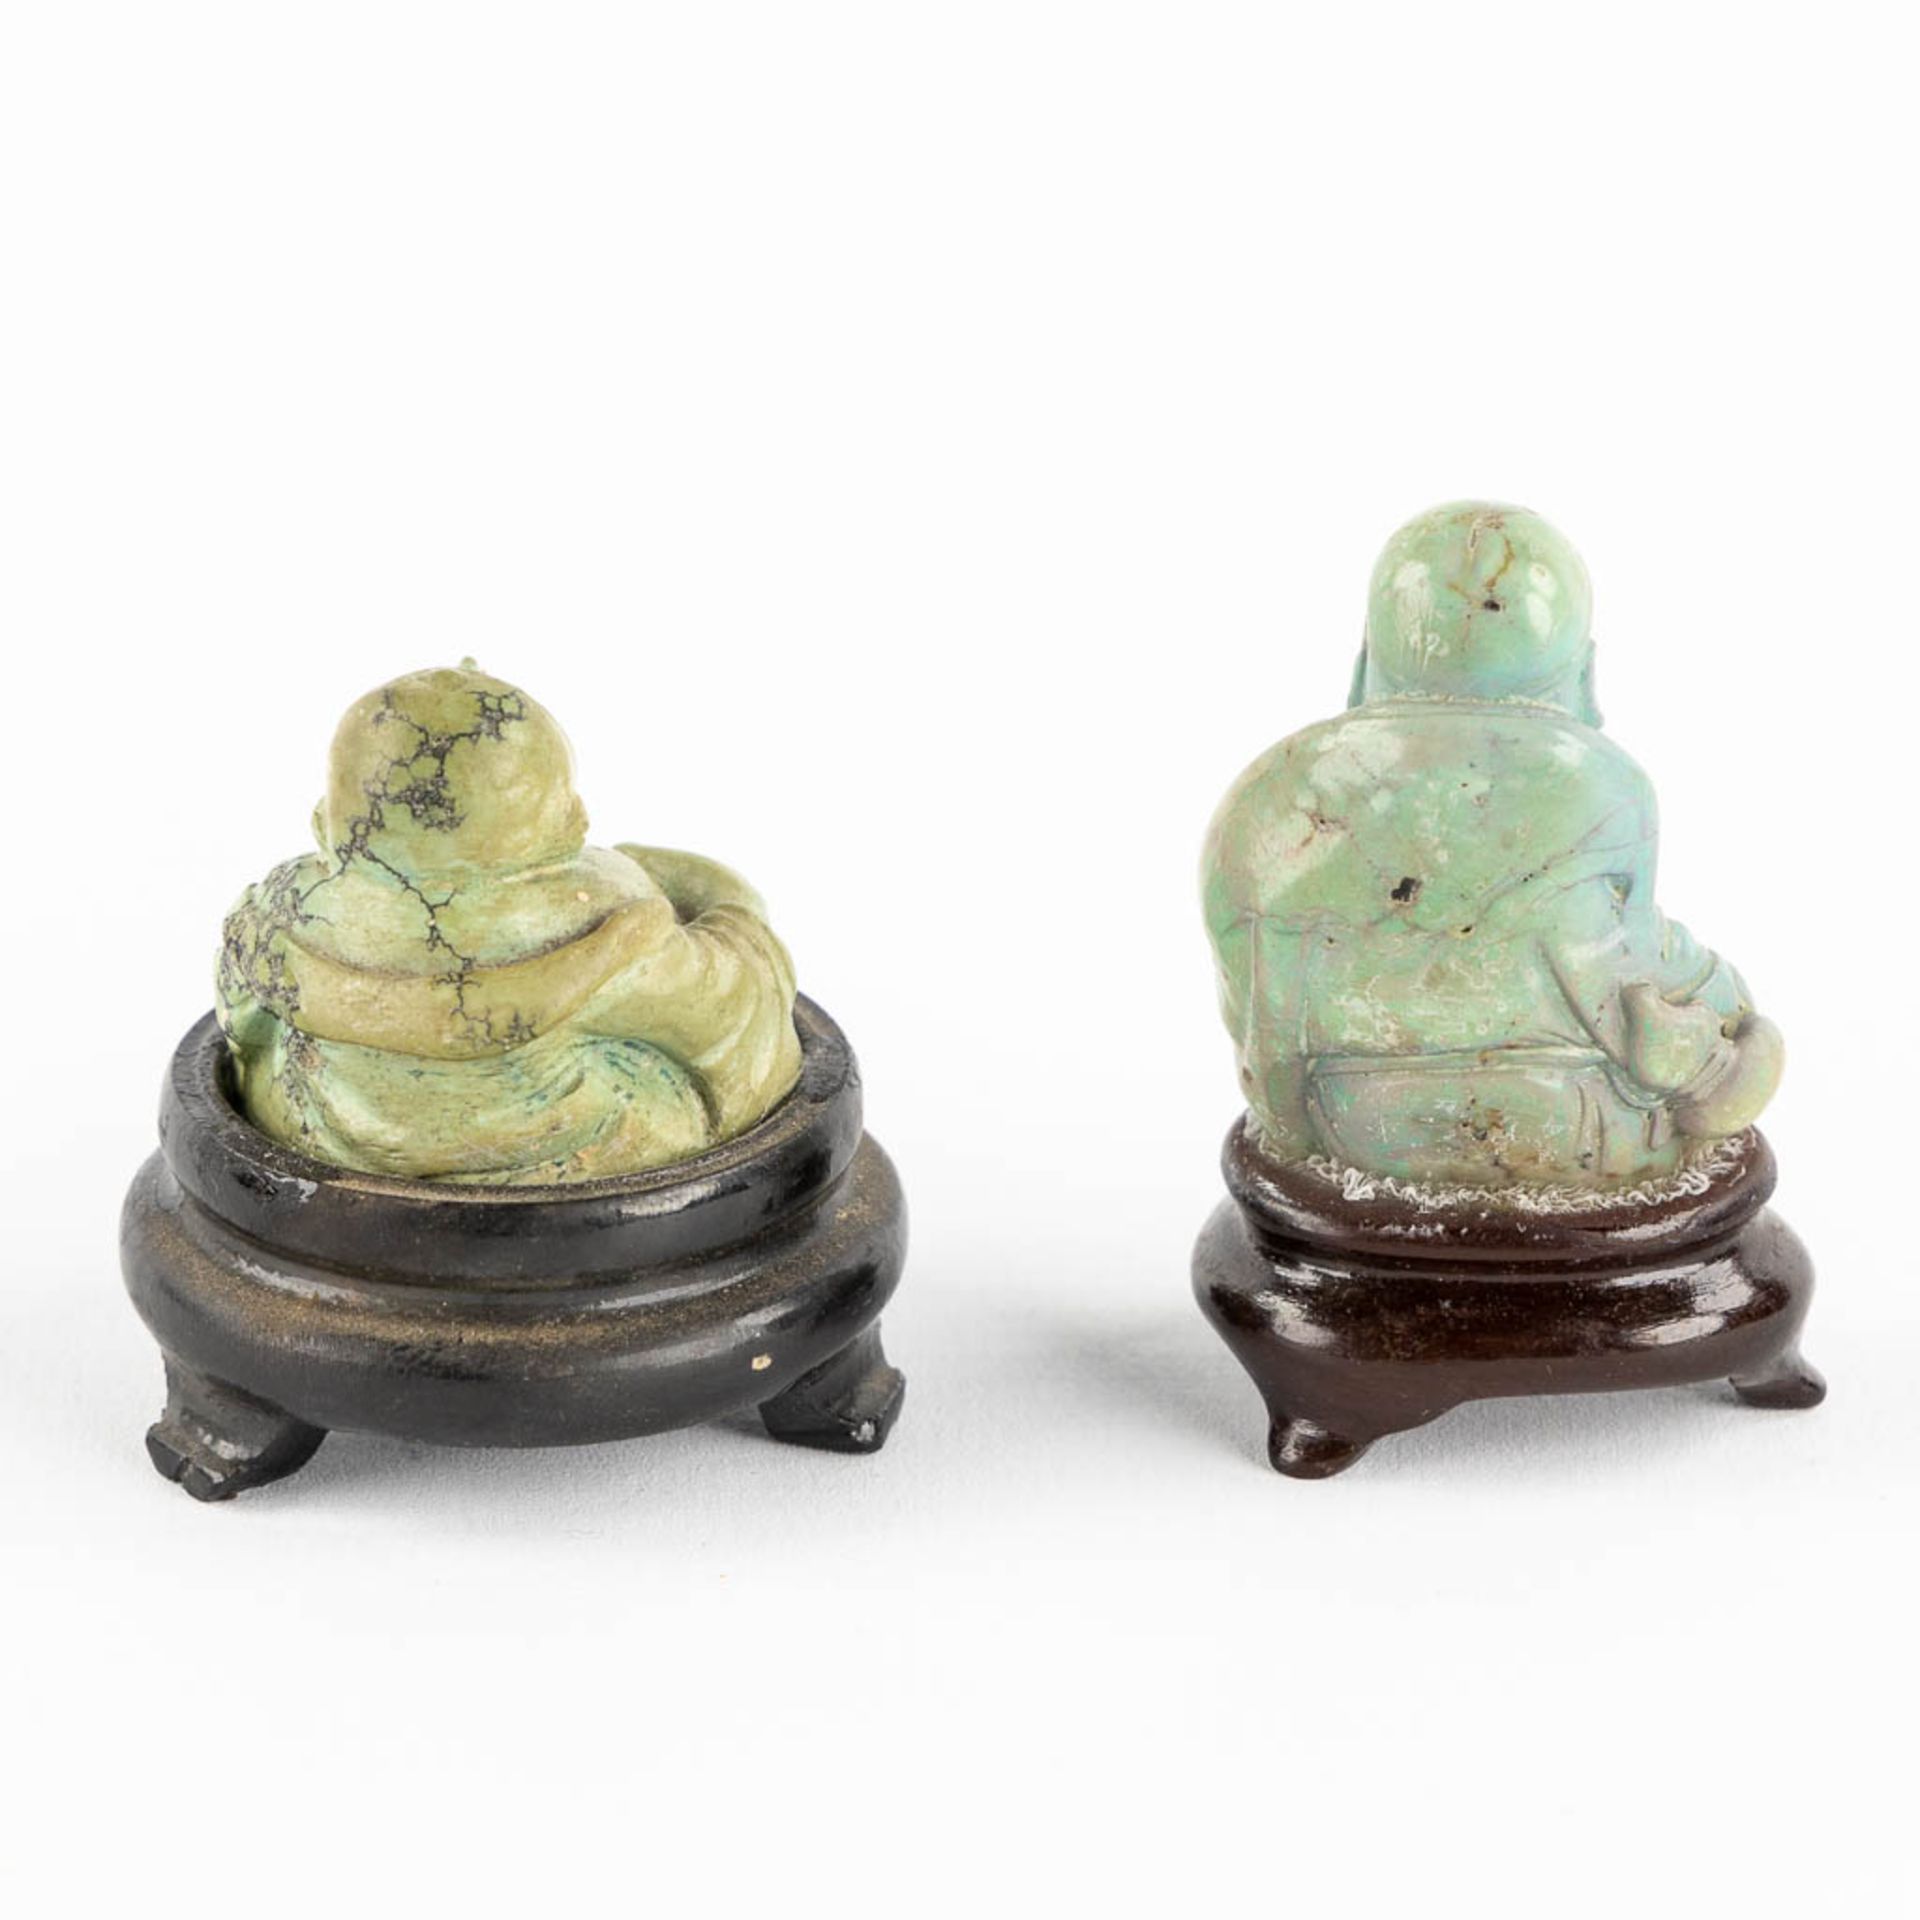 Six Buddha and a snuff bottle, Sculptured hardstones or jade. China. (L:6 x W:8 x H:11,5 cm) - Image 14 of 16